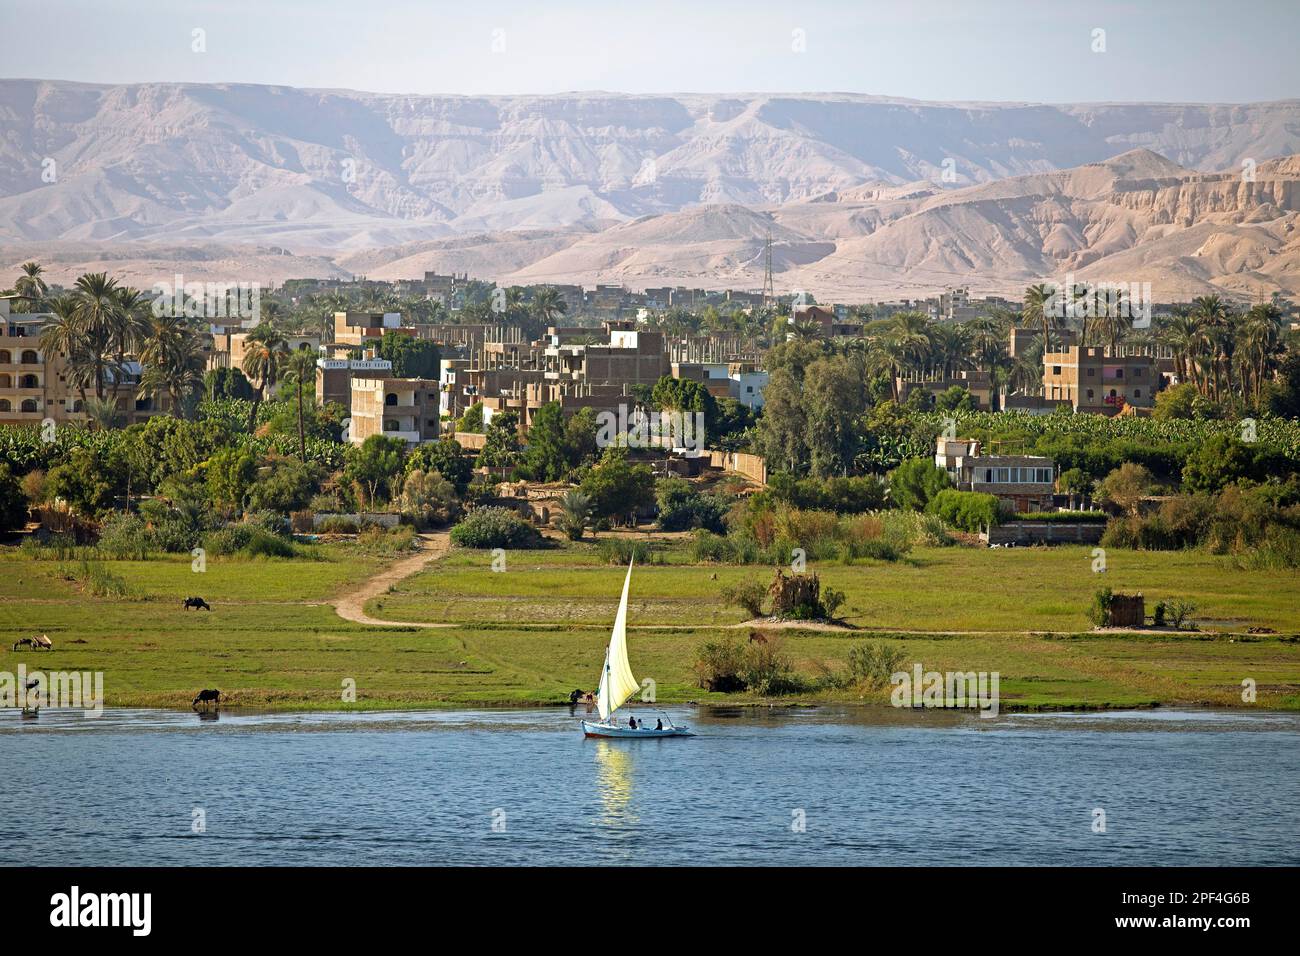 Felucca or traditional sailing boat on the Nile, behind Luxor and the Eastern Desert, Egypt Stock Photo